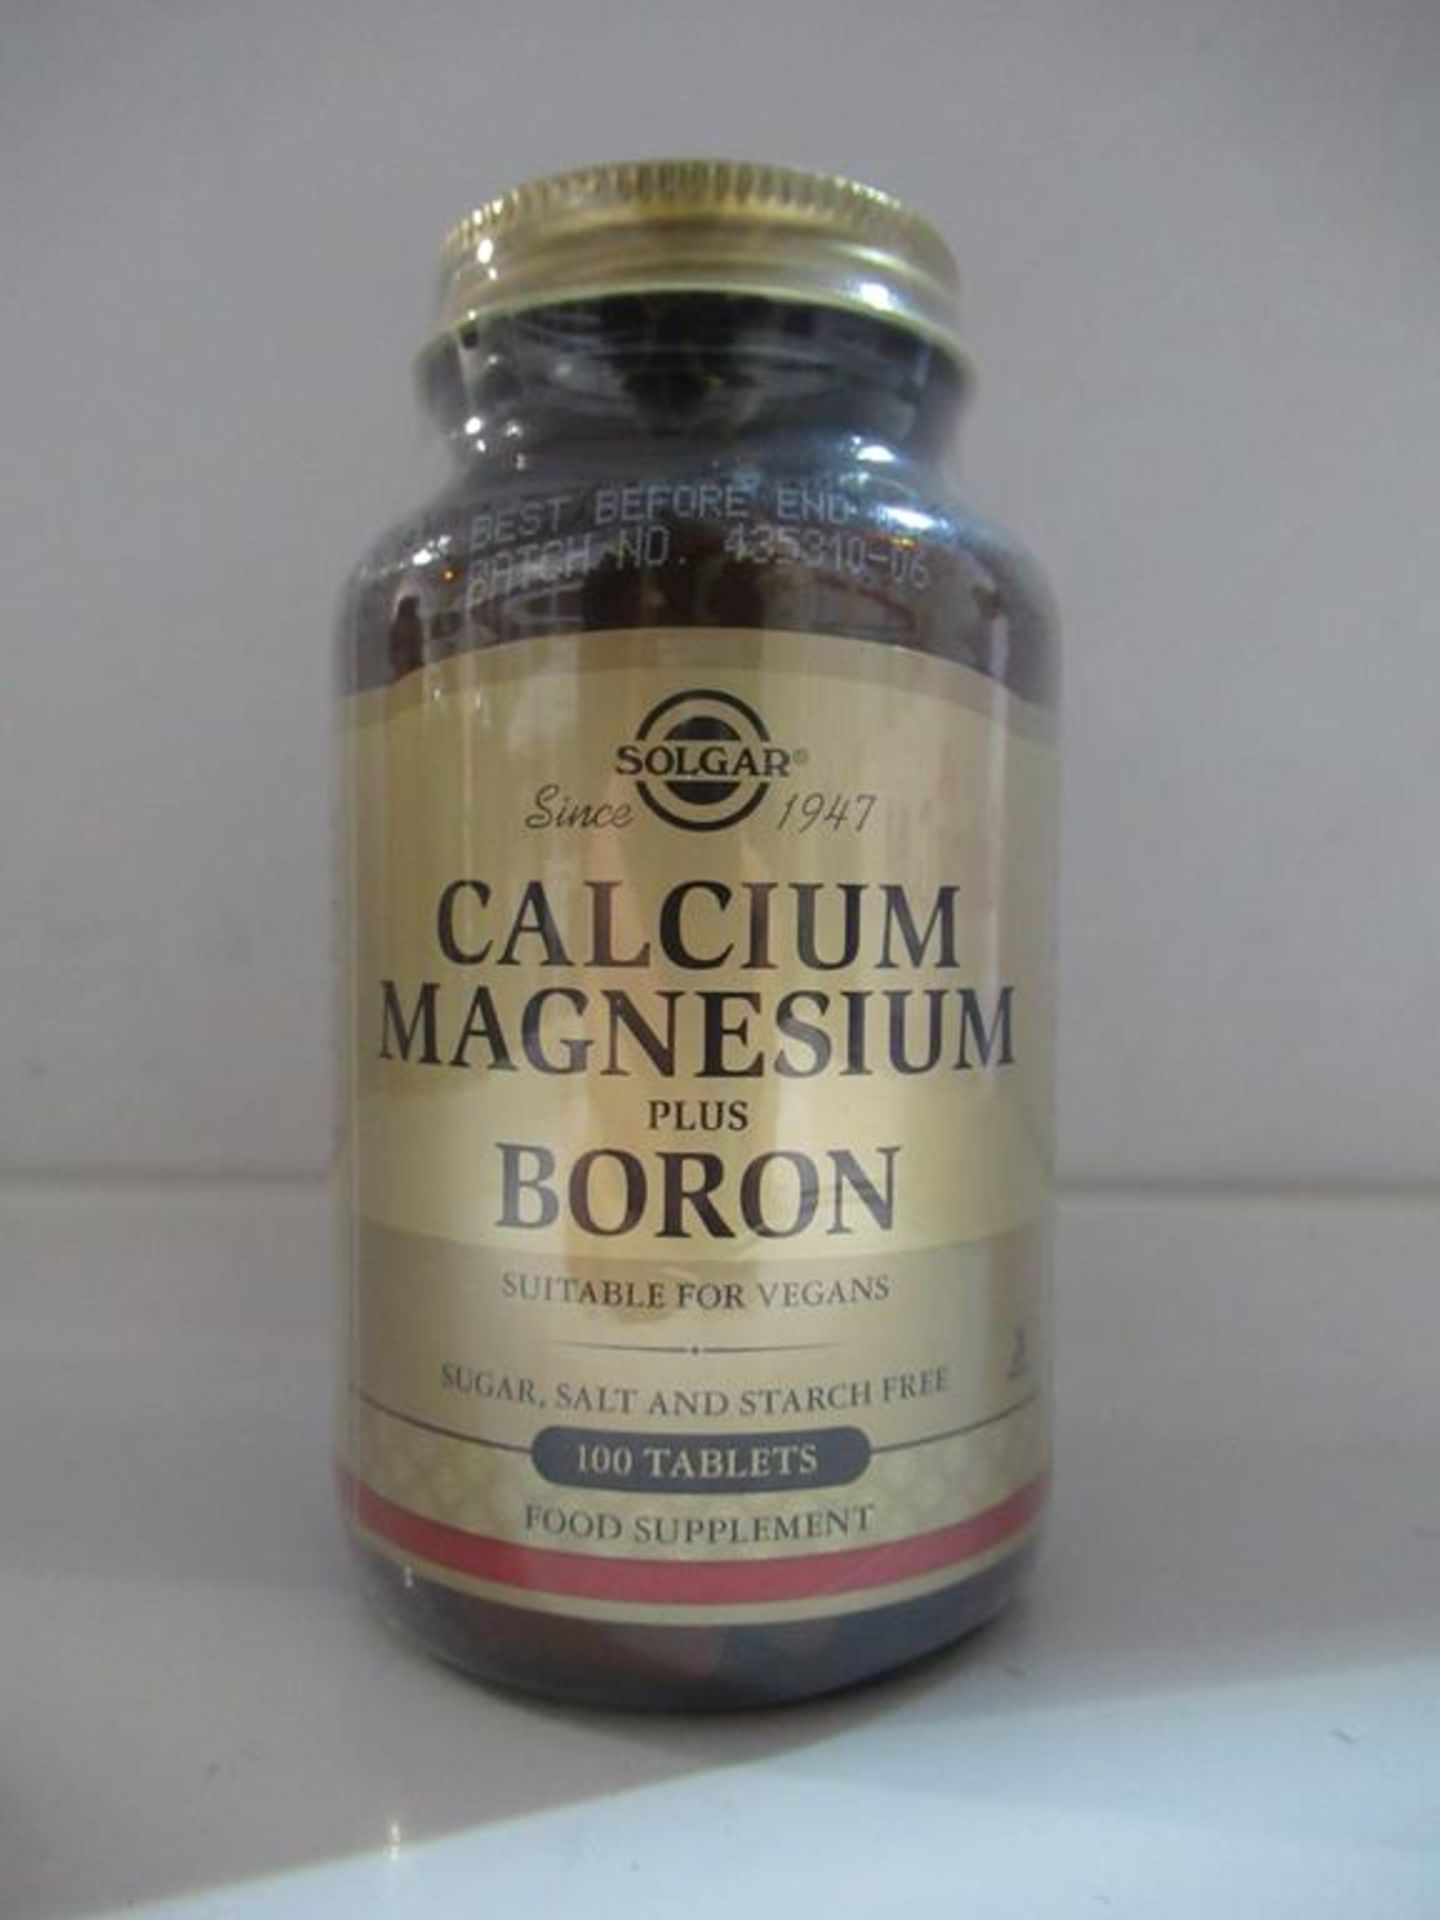 12 x supplement capsules/tablets of Lecithin, Calcium Magnesium and Folate - Image 7 of 8